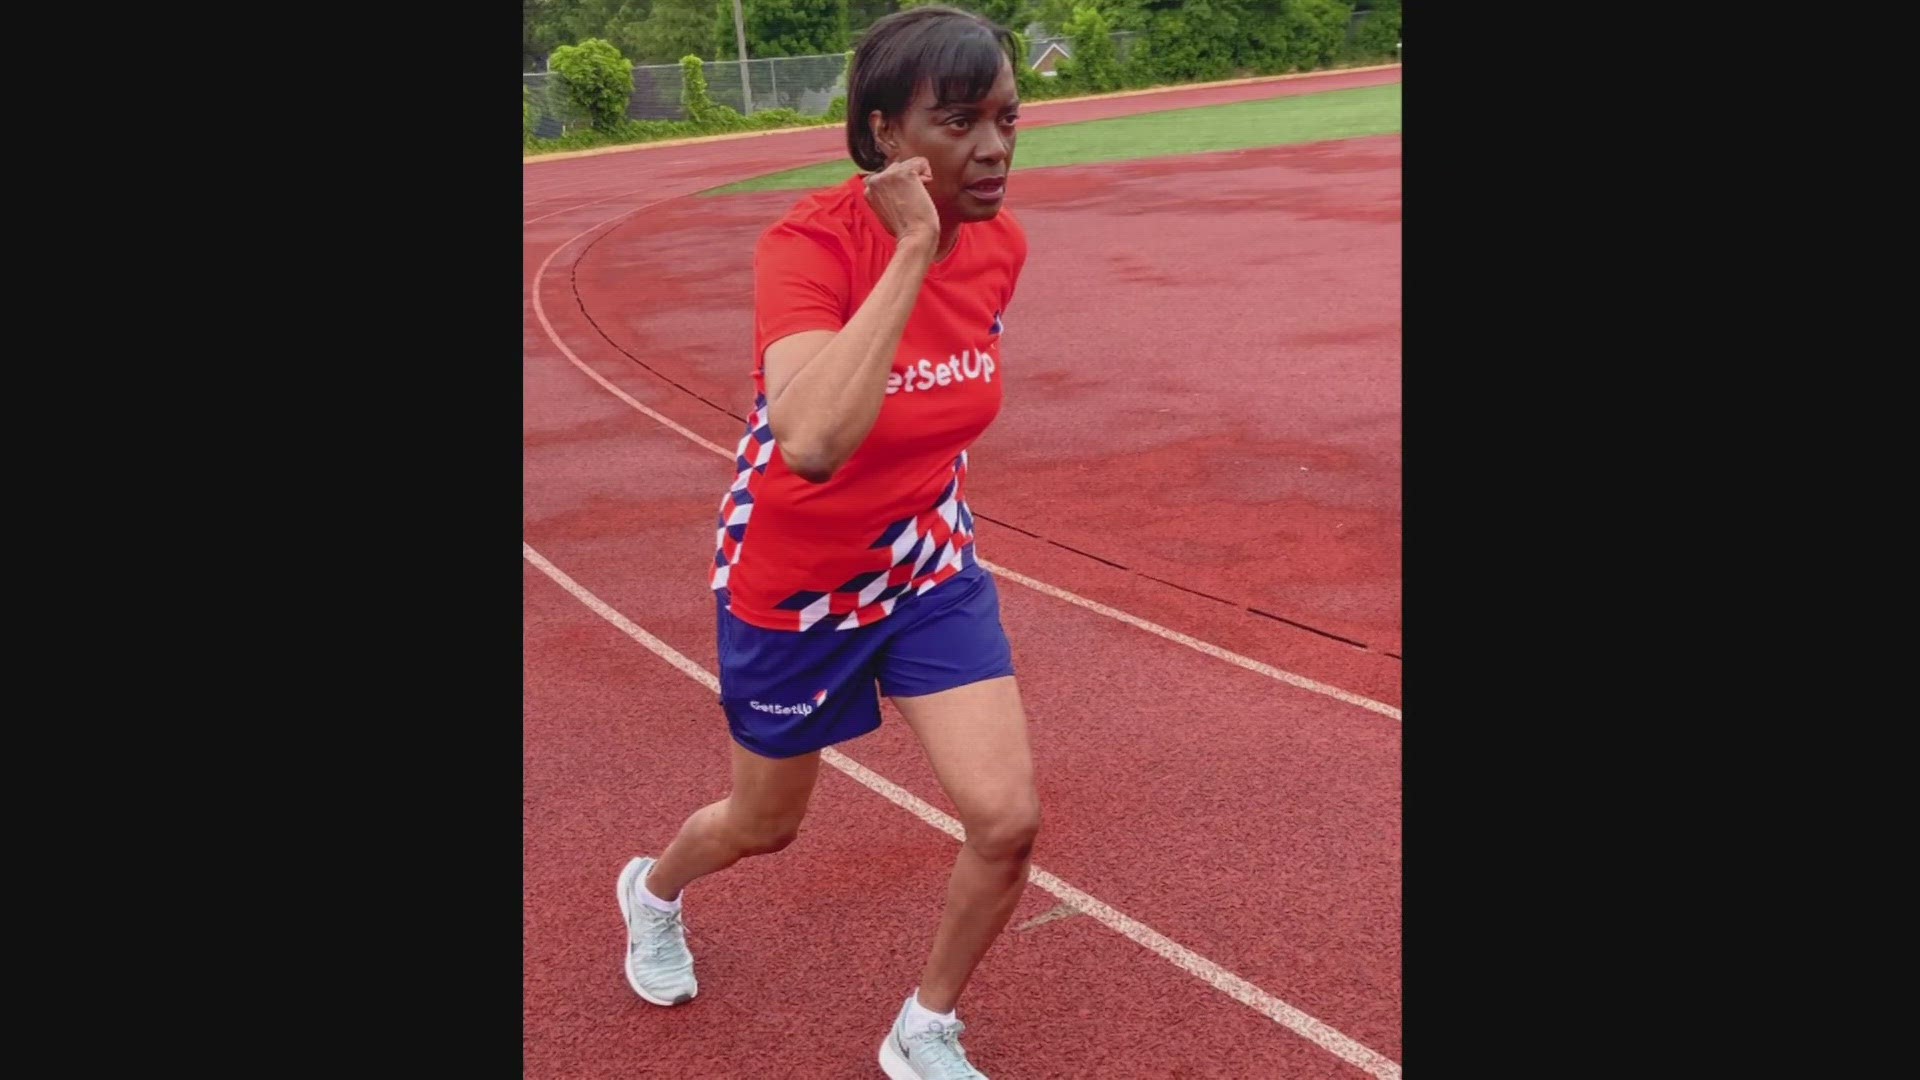 At age 70, Madonna Hanna said her track times are only getting faster. After a long dedicated fashion career, Hanna turned her focus to athletics.